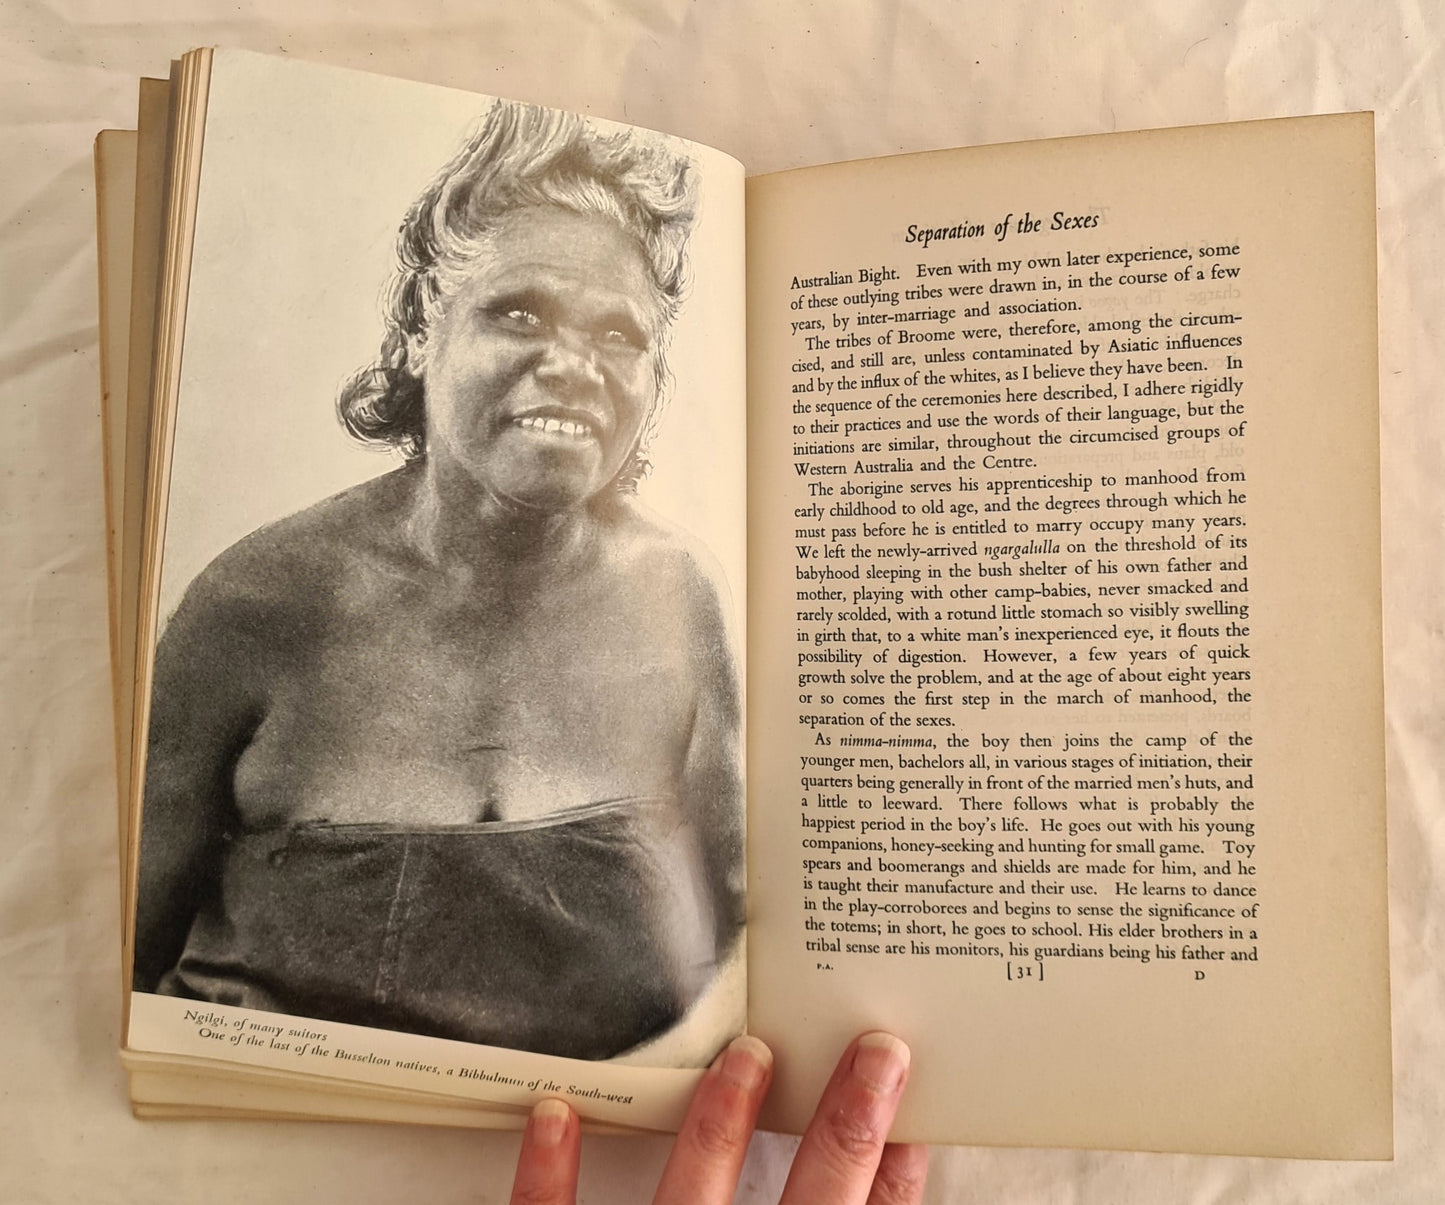 The Passing of the Aborigines by Daisy Bates